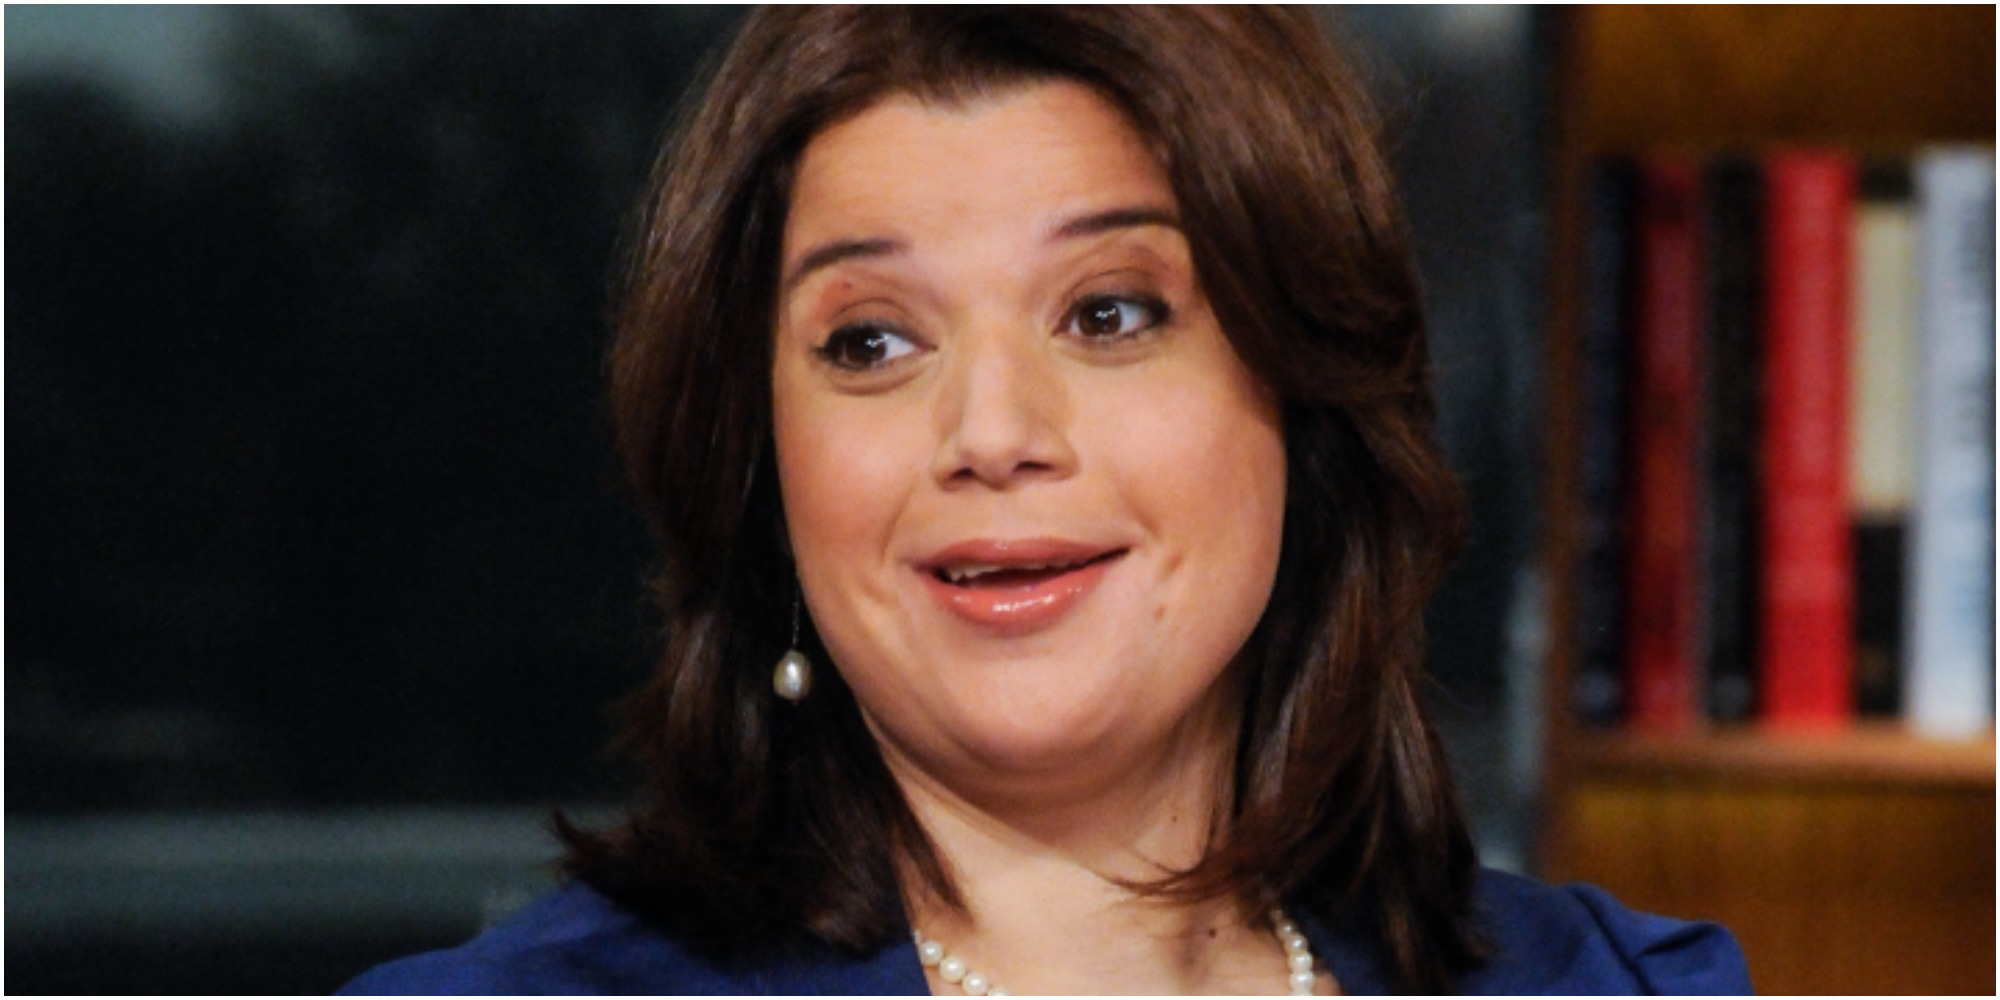 Ana Navarro is photographed as part of a panel discussion.